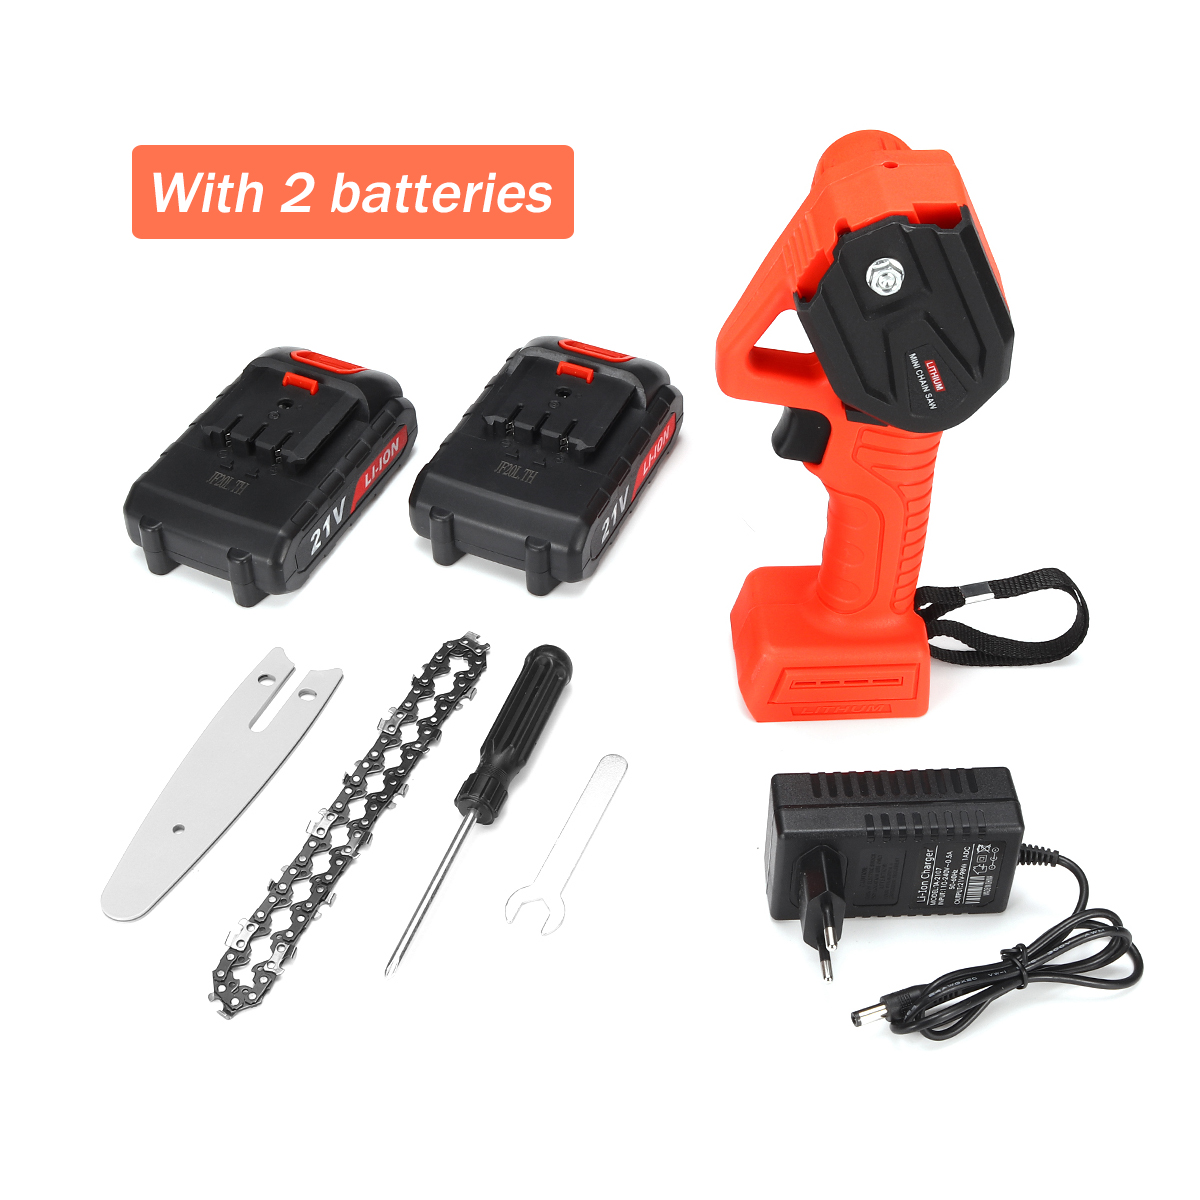 600W-4Inch-Cordless-Electric-Chain-Saw-Wood-Cutter-Tools-Garden-Woodwork-W-1pc-or-2pcs-Battery-1801758-10